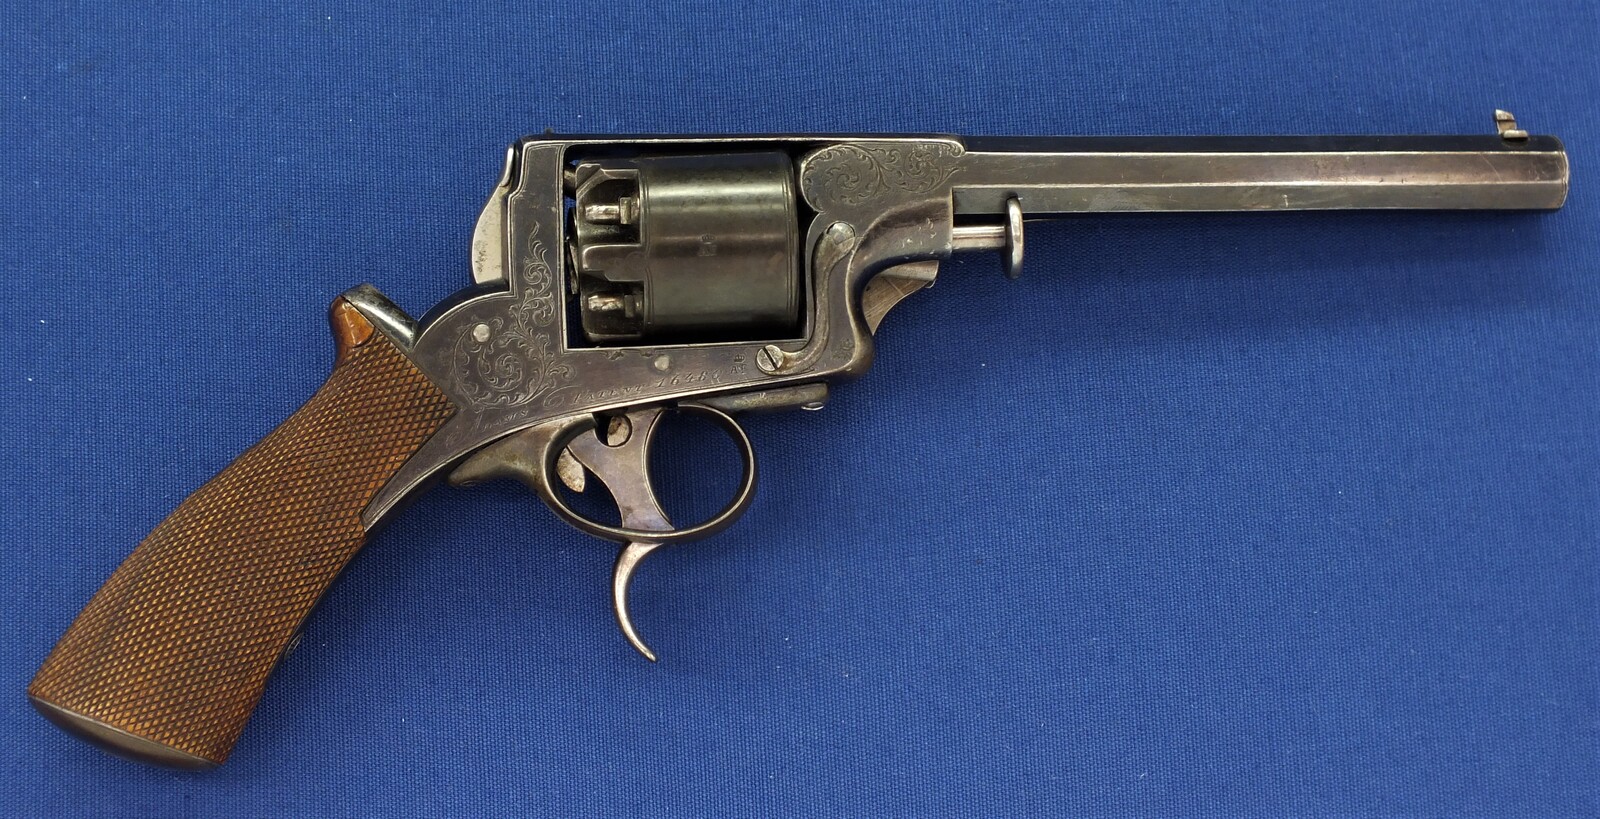 A very nice 19th century antique Dutch Adams Patent Tranter Double Action Percussion Revolver signed FABR. P. STEVENS TE MAASTRICHT and A.FRANCOTTE a LIEGE,  5 shot, caliber 11 mm, length 33,5 cm, in very good condition. Price 2.575 euro